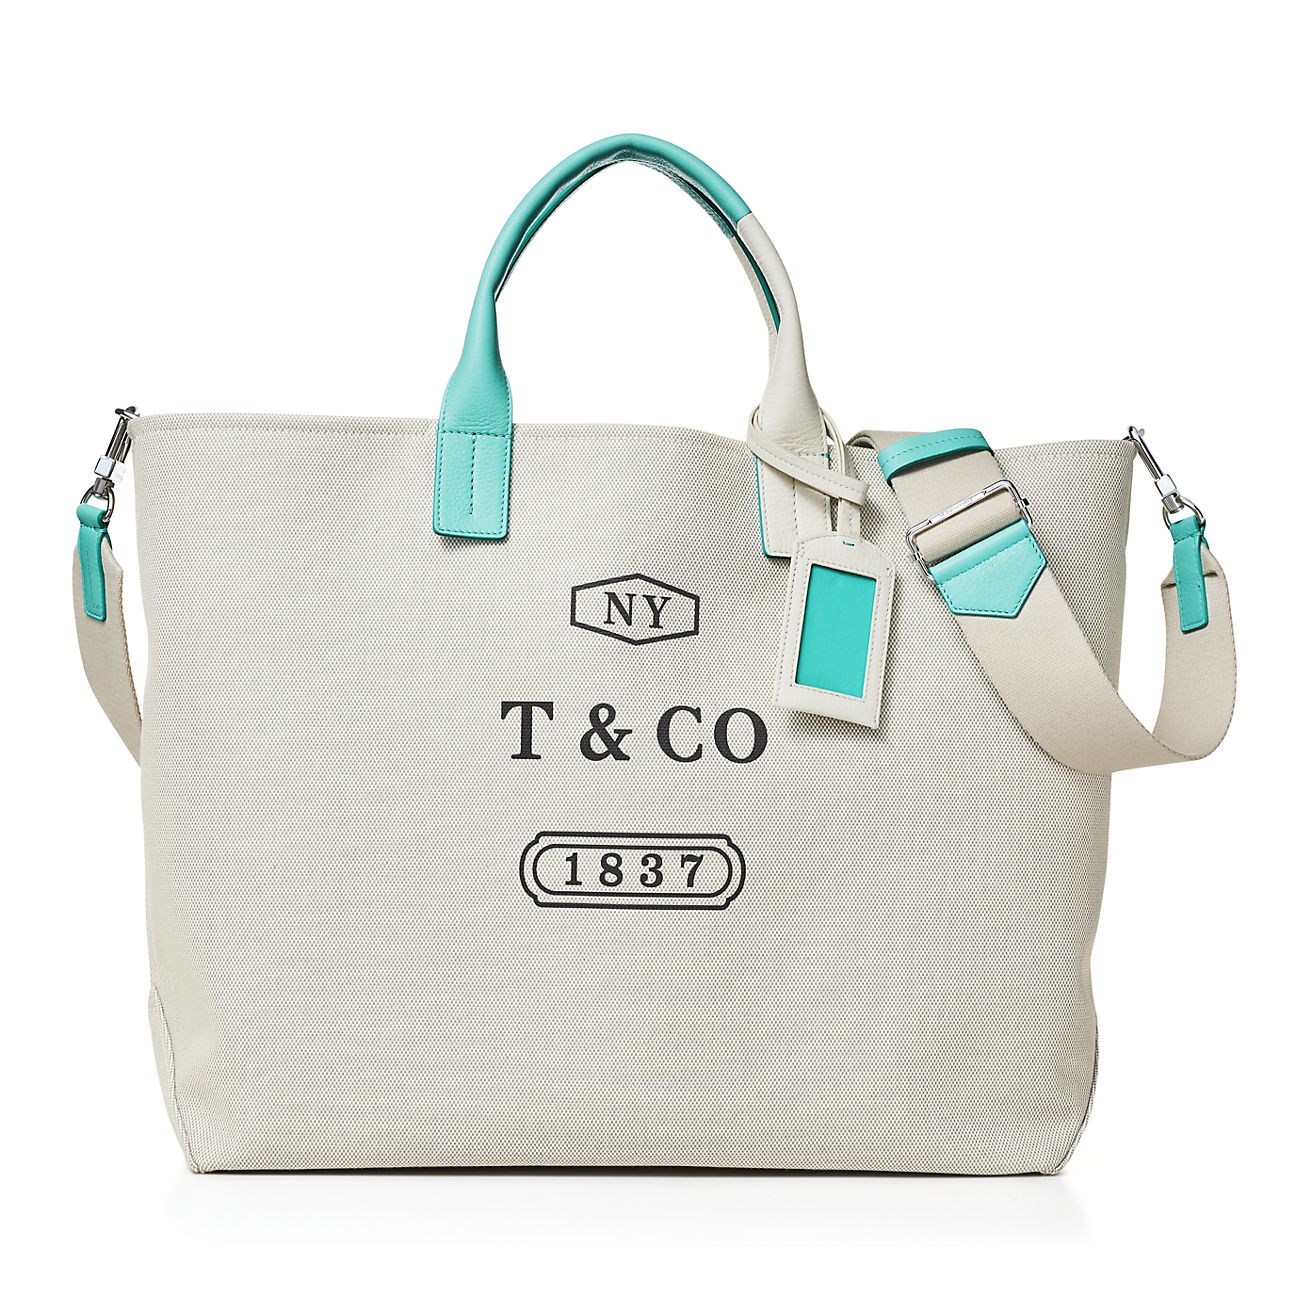 tiffany and co tote